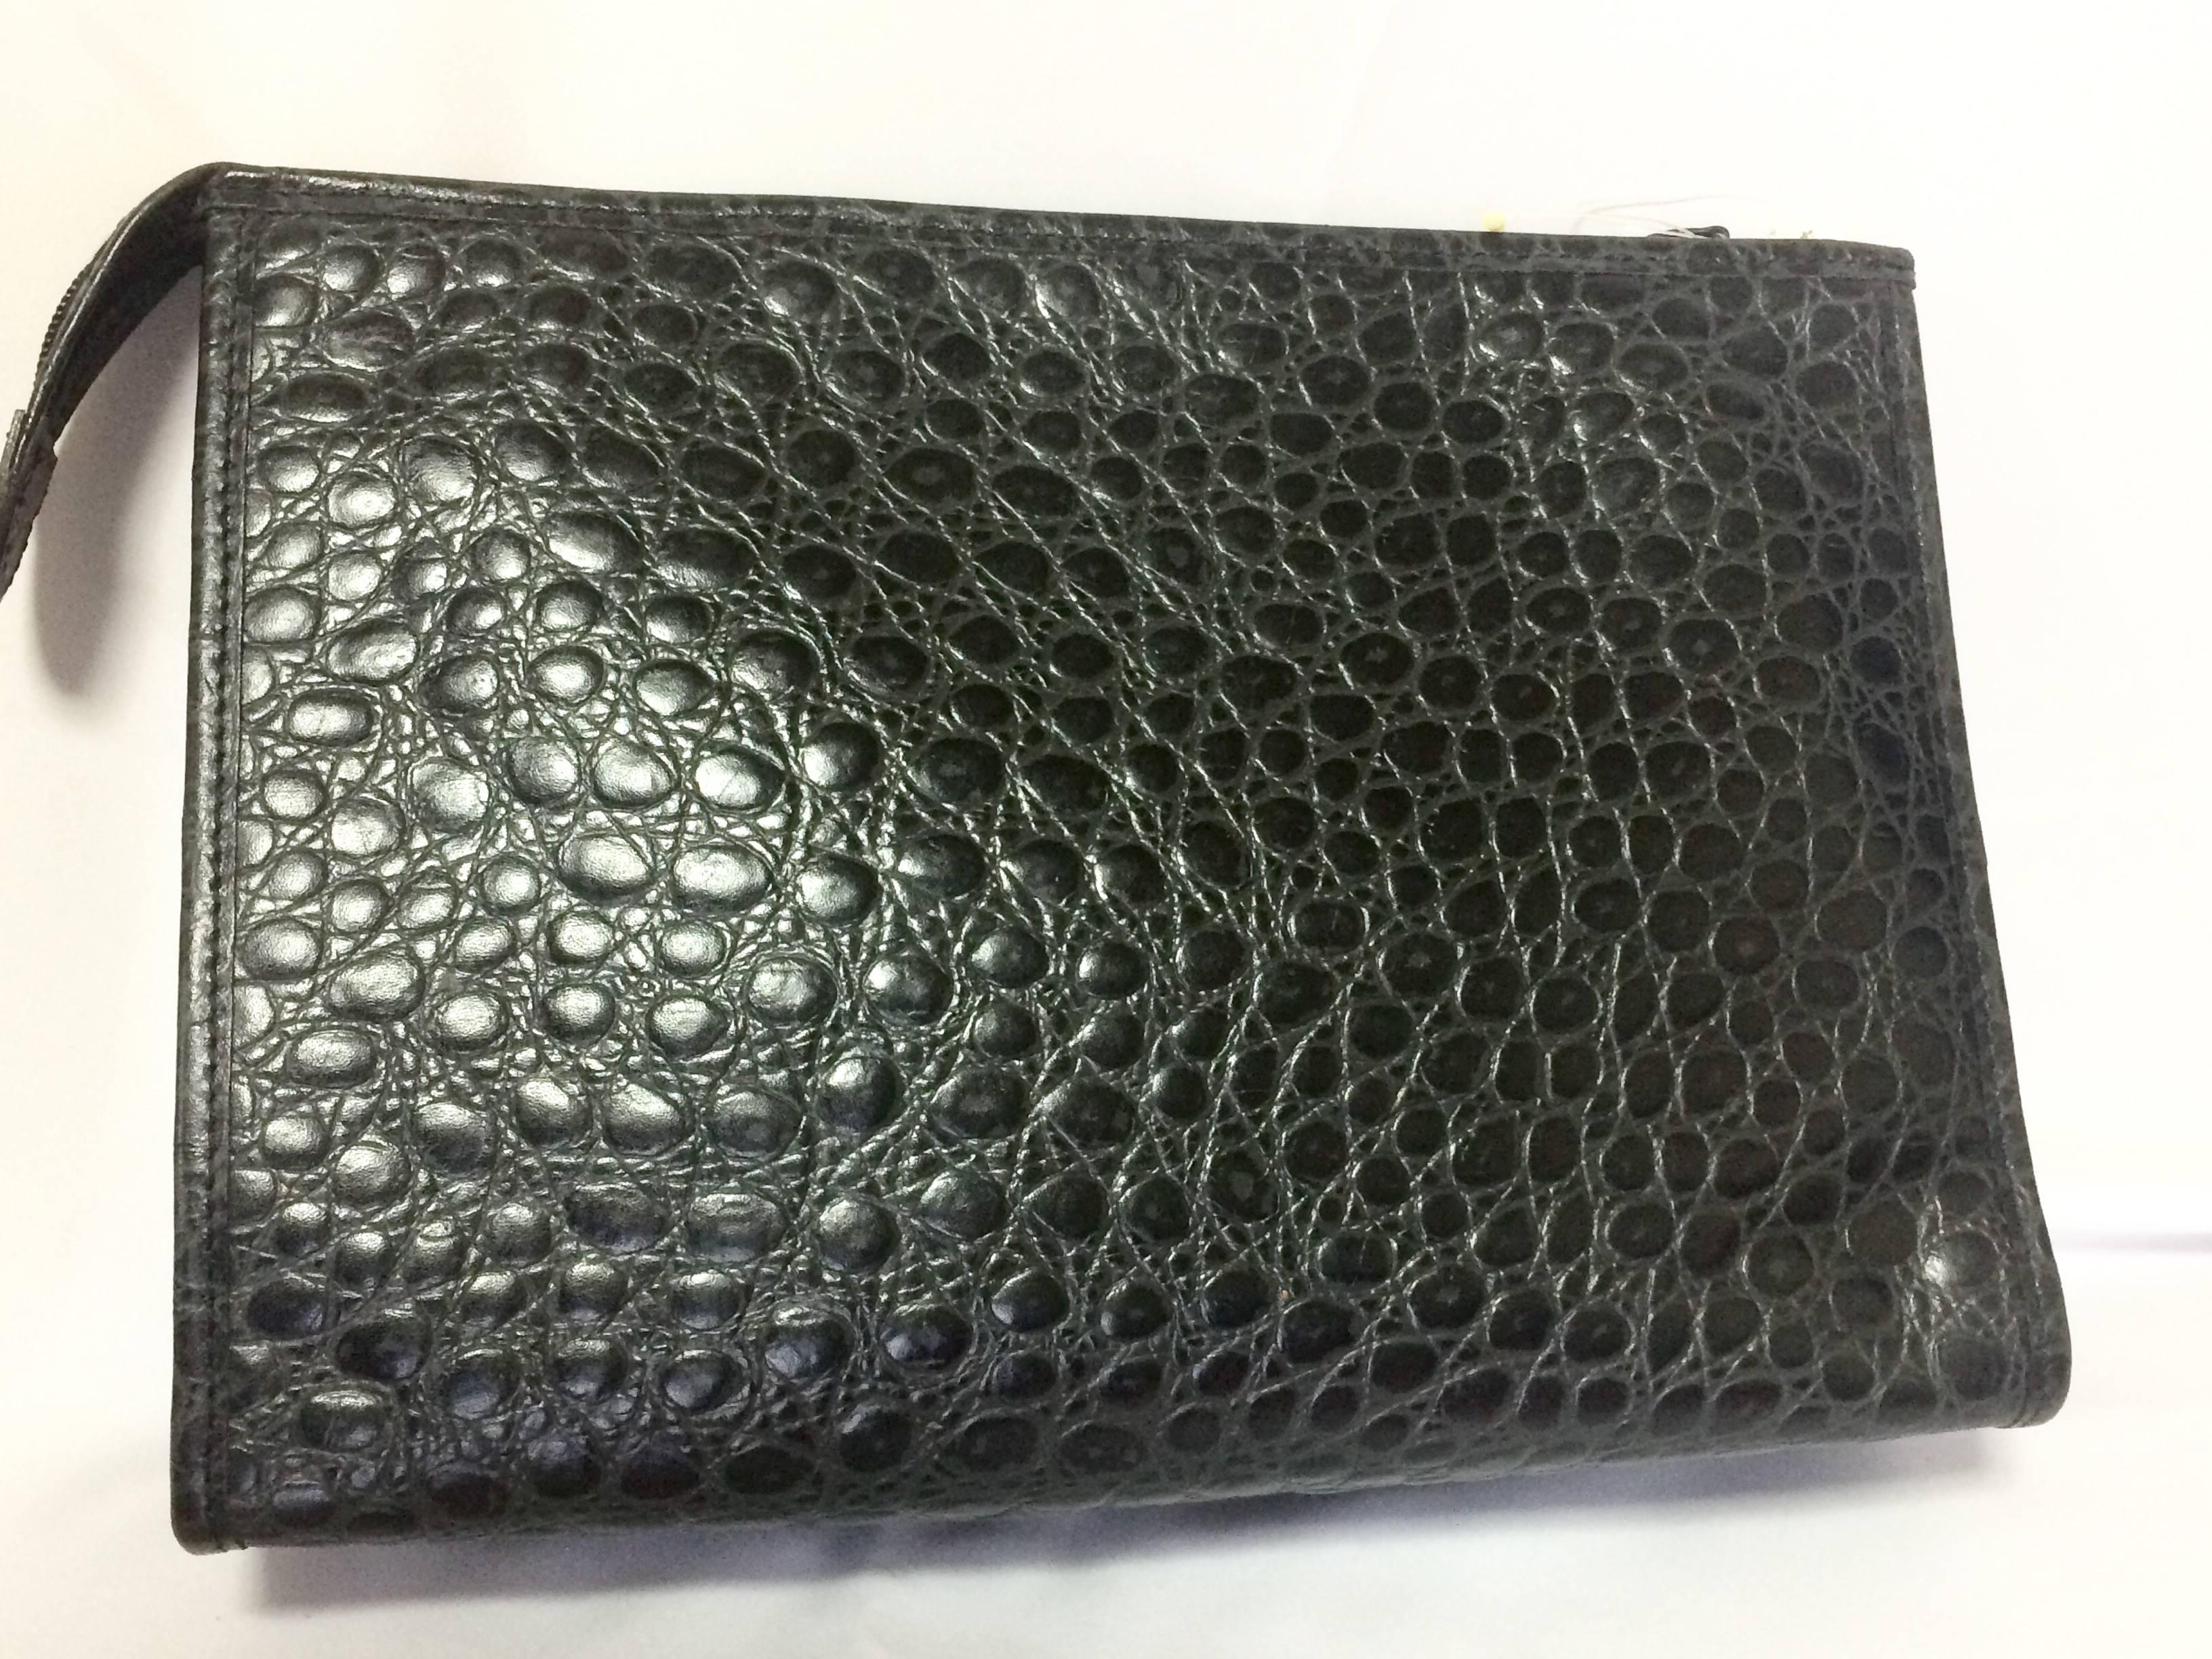 Black Vintage MOSCHINO classic croc-embossed black leather clutch bag with key logo